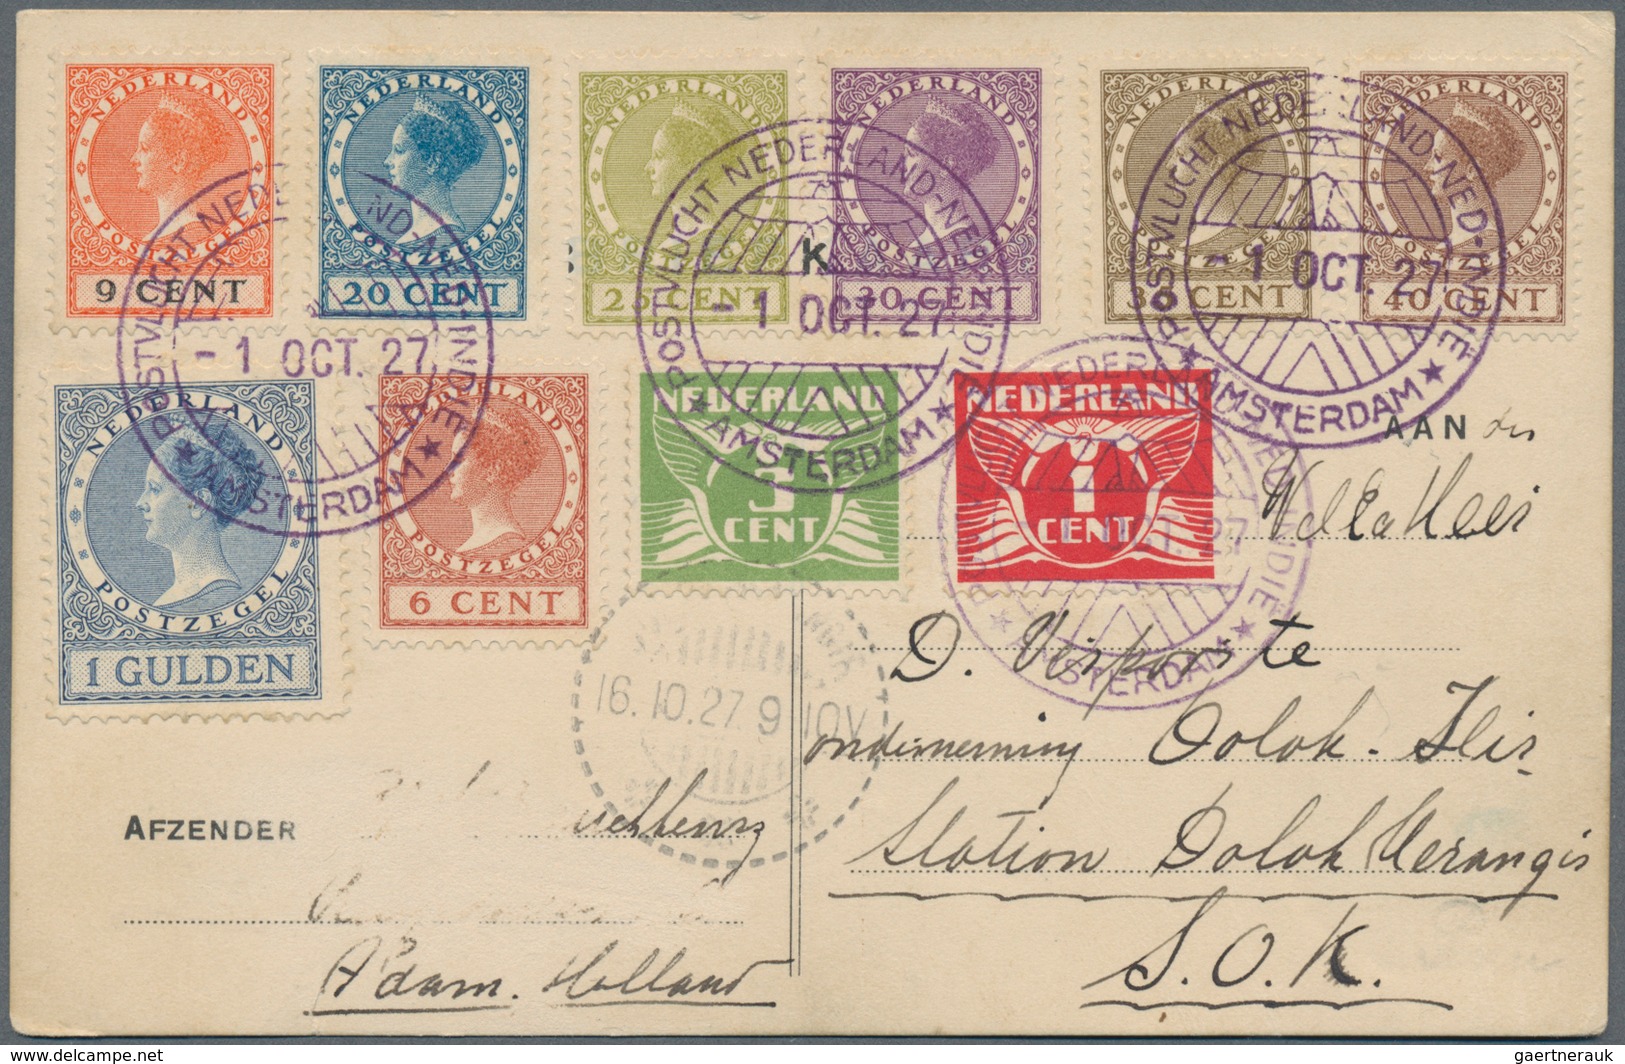 Flugpost Alle Welt: 1909/1940, very comprehensive collection with ca.160 airmail covers/cards, compr